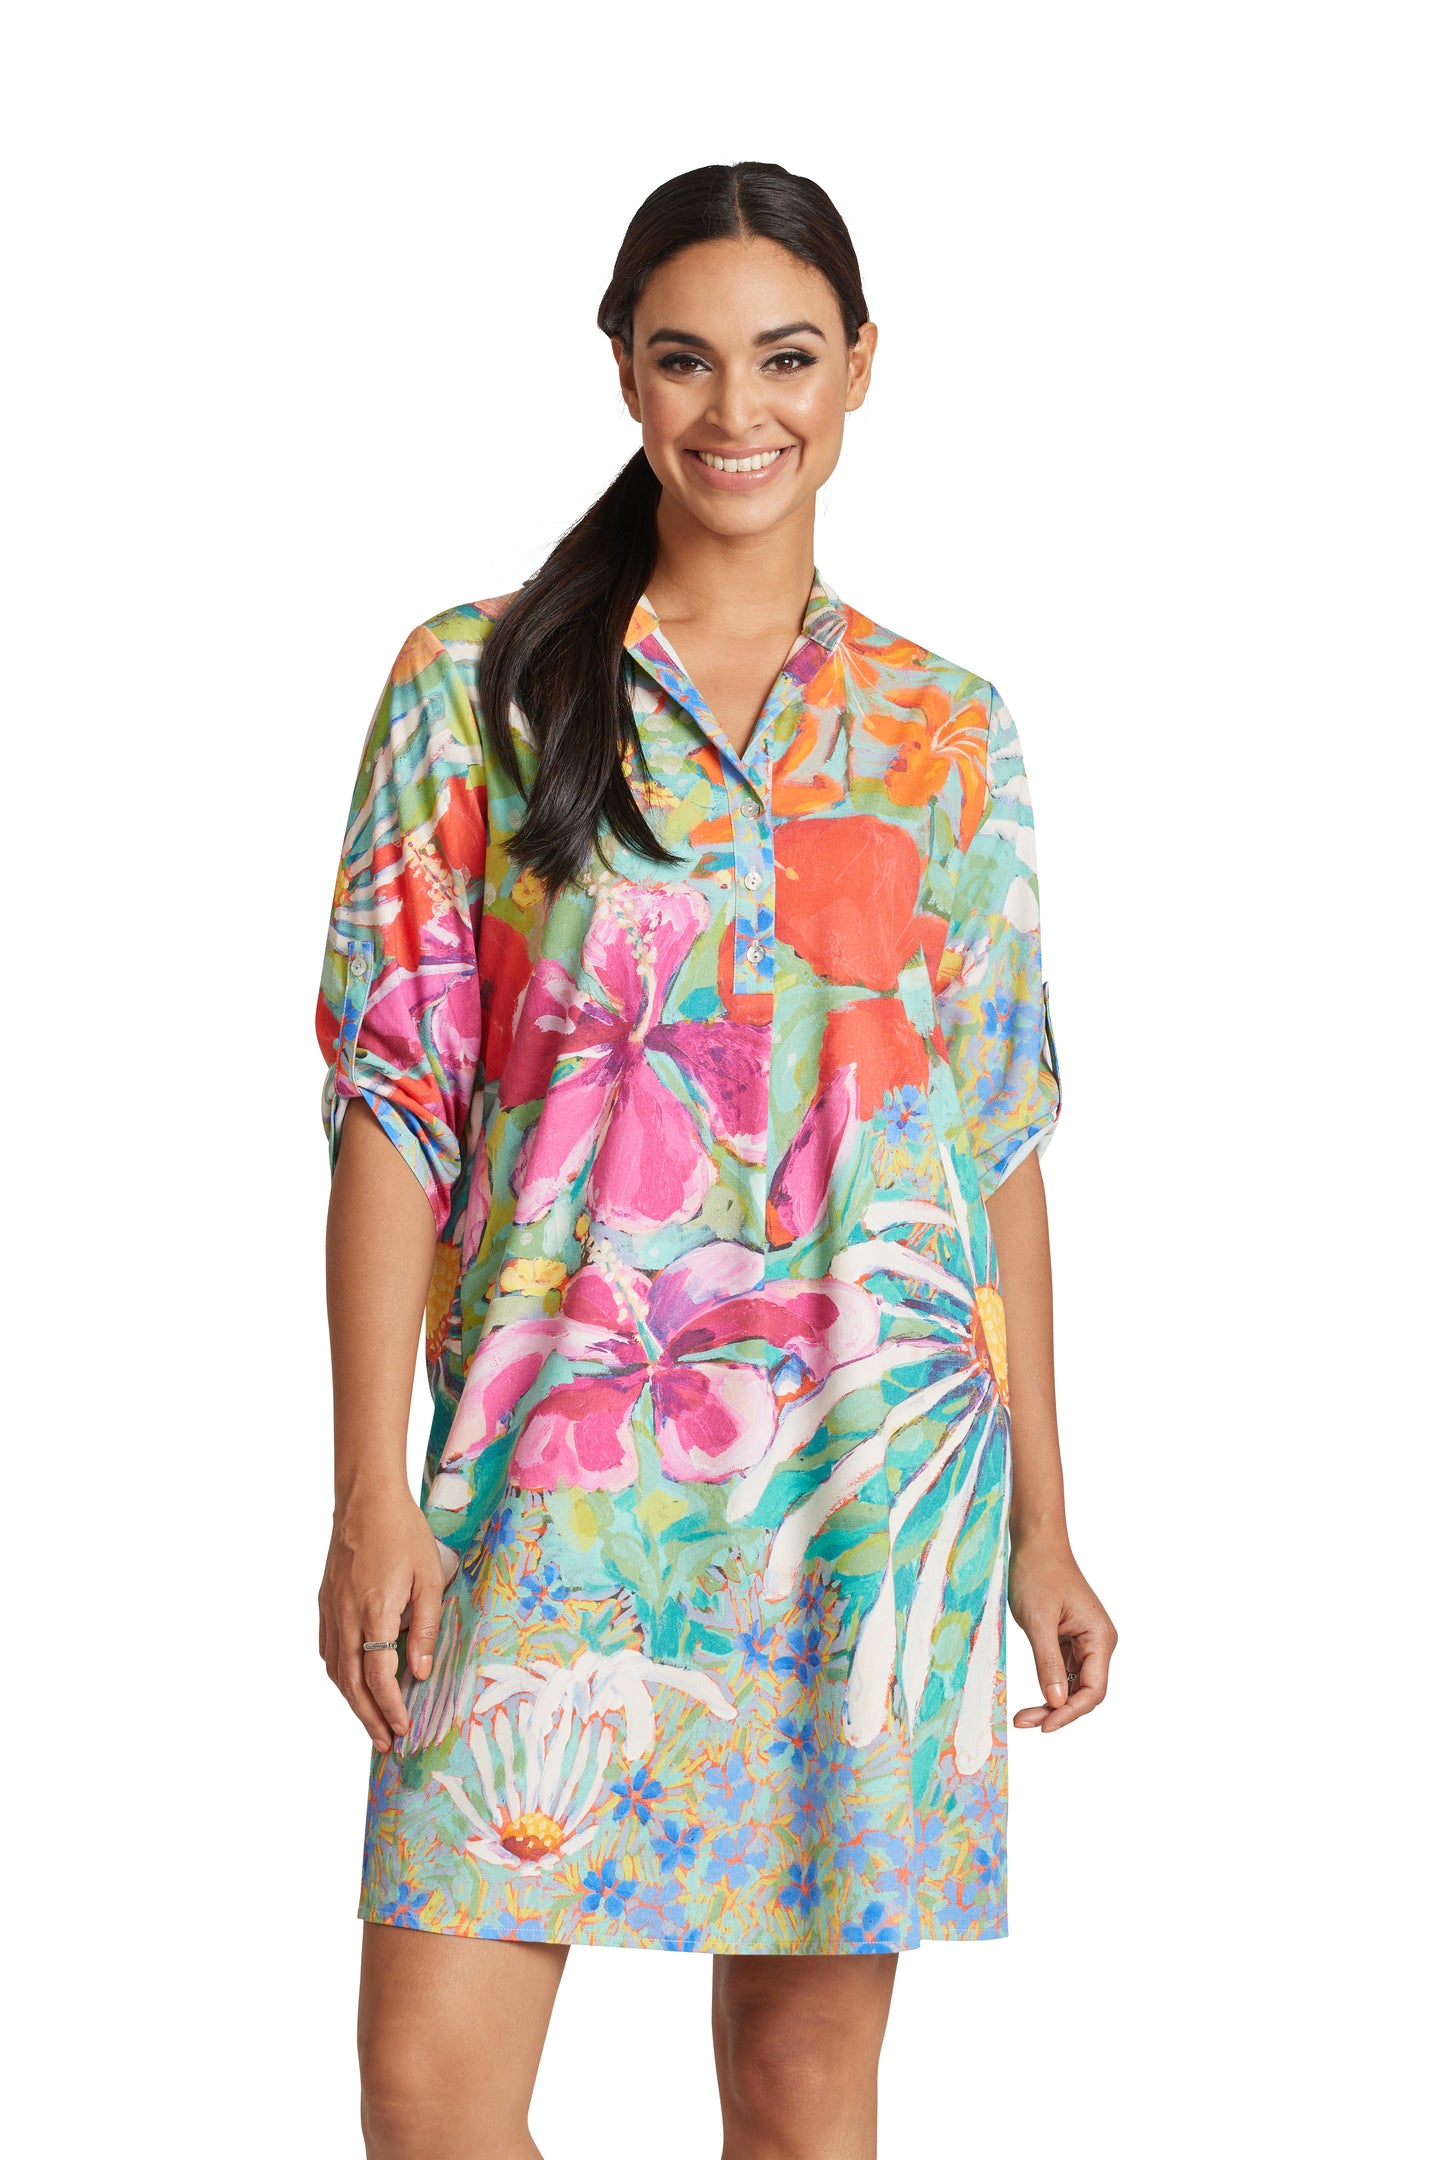 Where Butterflies and Bees Are 3/4-length sleeve shirt dress